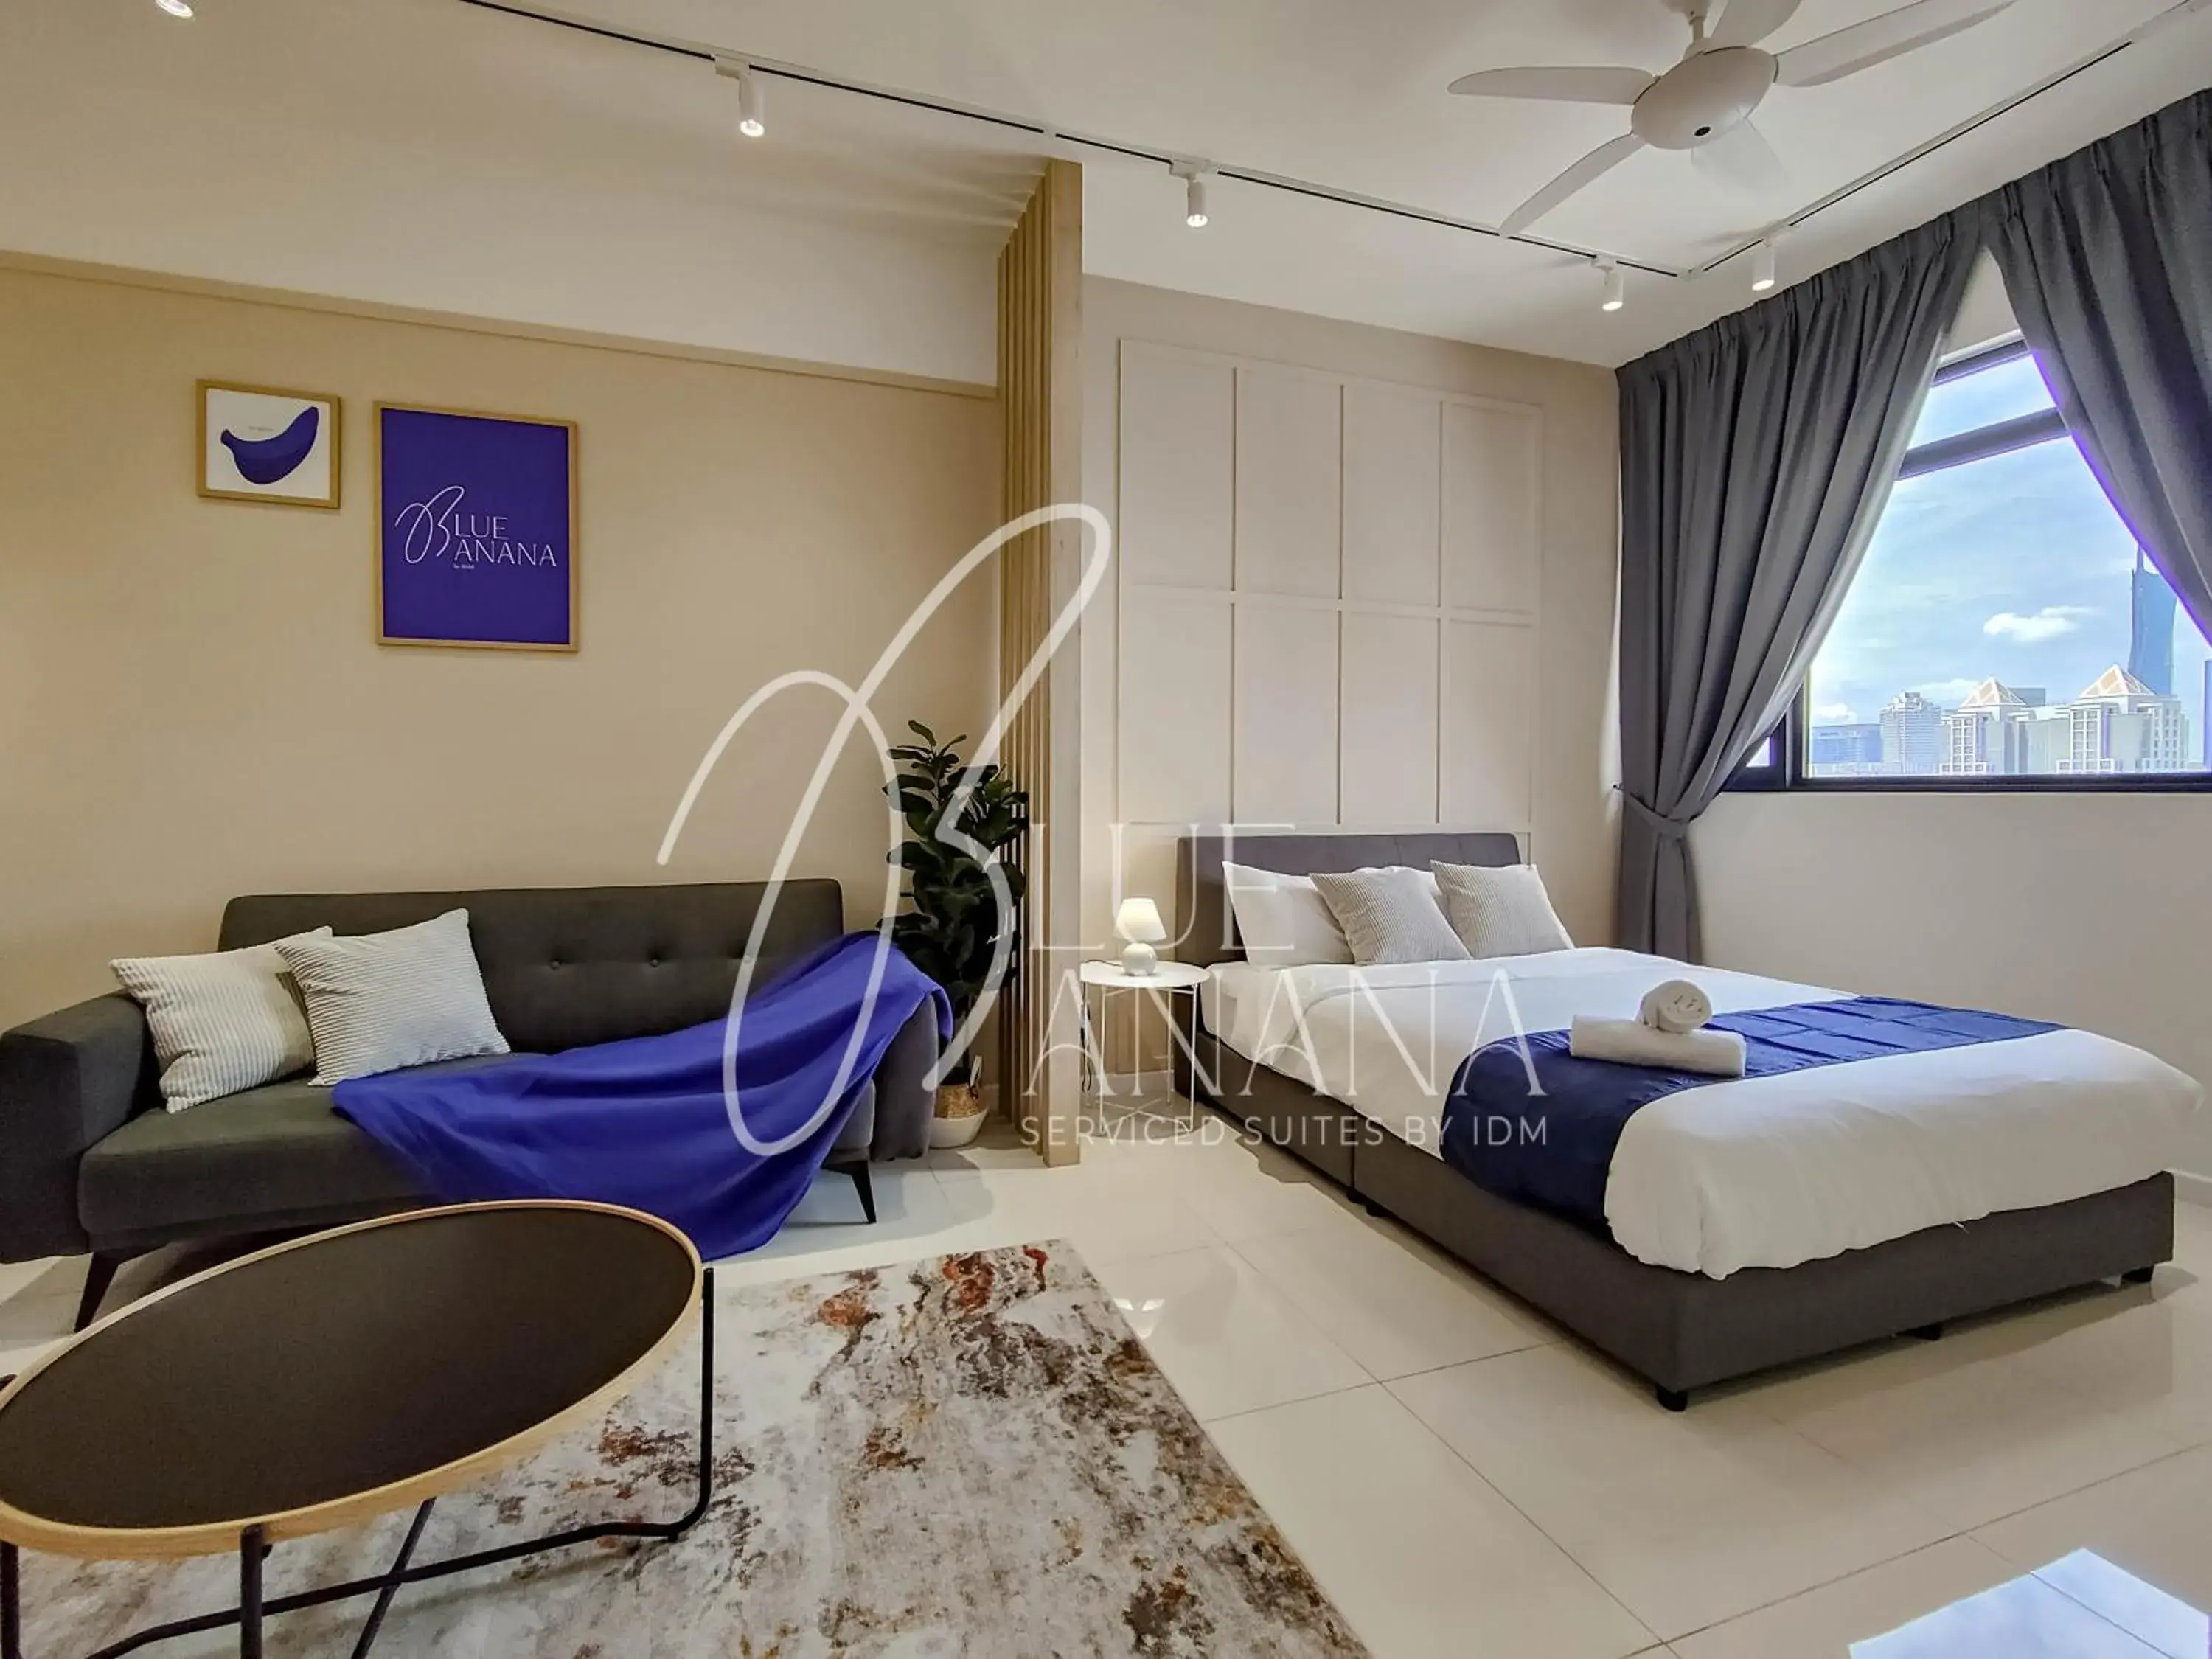 Bed in Chambers Residence Premier Suites, Chow Kit, Kuala Lumpur by BlueBanana